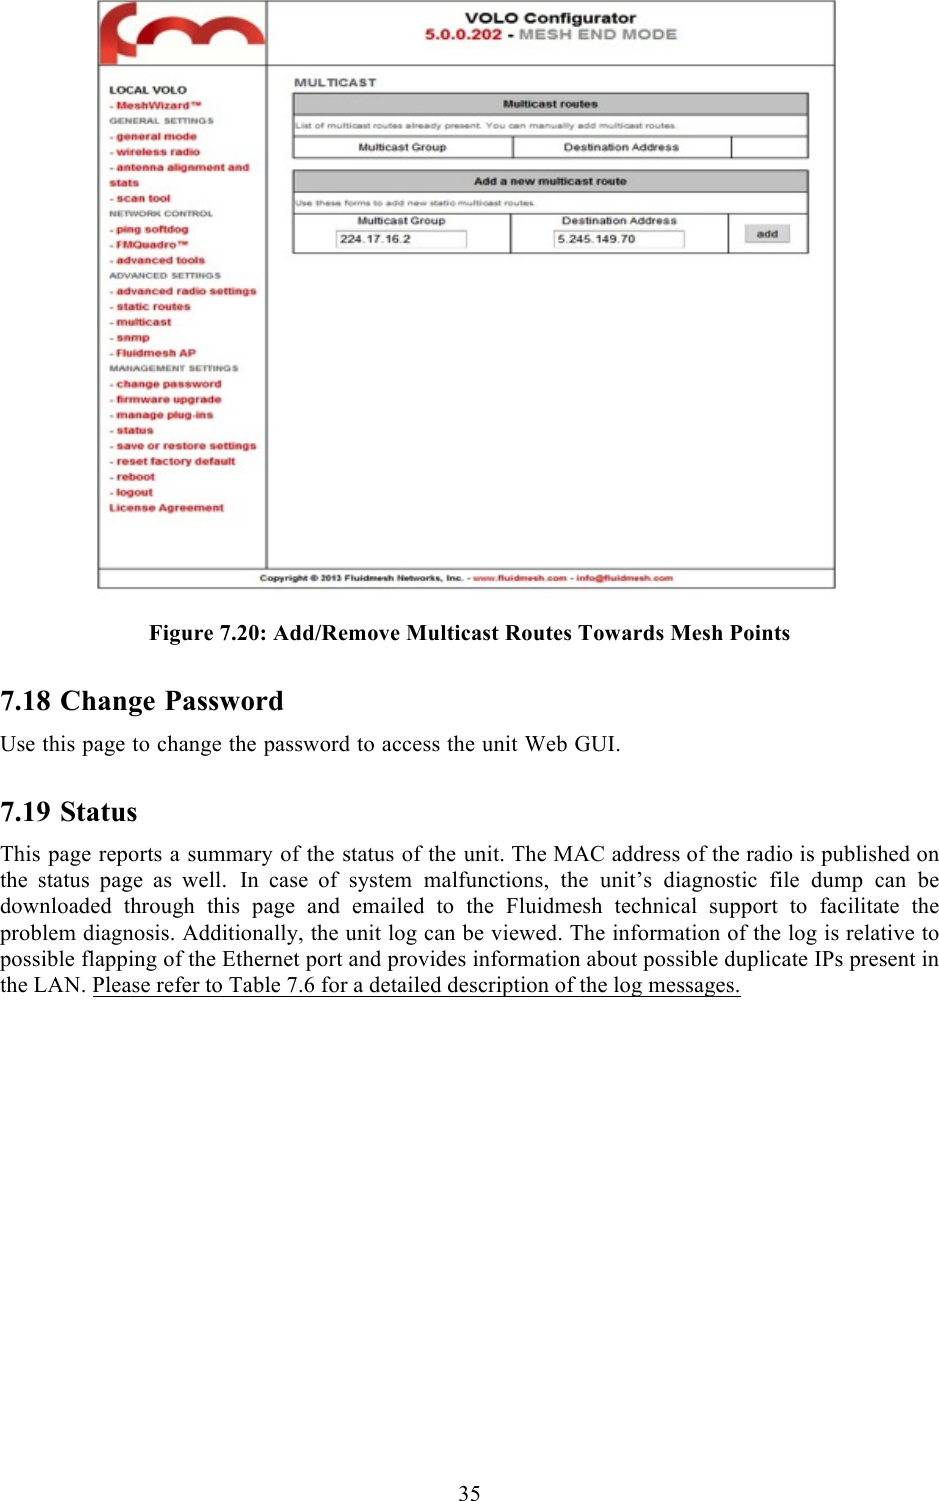  35    Figure 7.20: Add/Remove Multicast Routes Towards Mesh Points 7.18 Change Password Use this page to change the password to access the unit Web GUI. 7.19 Status This page reports a summary of the status of the unit. The MAC address of the radio is published on the  status  page  as  well.  In  case  of system malfunctions, the unit’s diagnostic file dump can be downloaded  through  this  page  and  emailed  to  the  Fluidmesh  technical  support  to  facilitate  the problem diagnosis. Additionally, the unit log can be viewed. The information of the log is relative to possible flapping of the Ethernet port and provides information about possible duplicate IPs present in the LAN. Please refer to Table 7.6 for a detailed description of the log messages.  